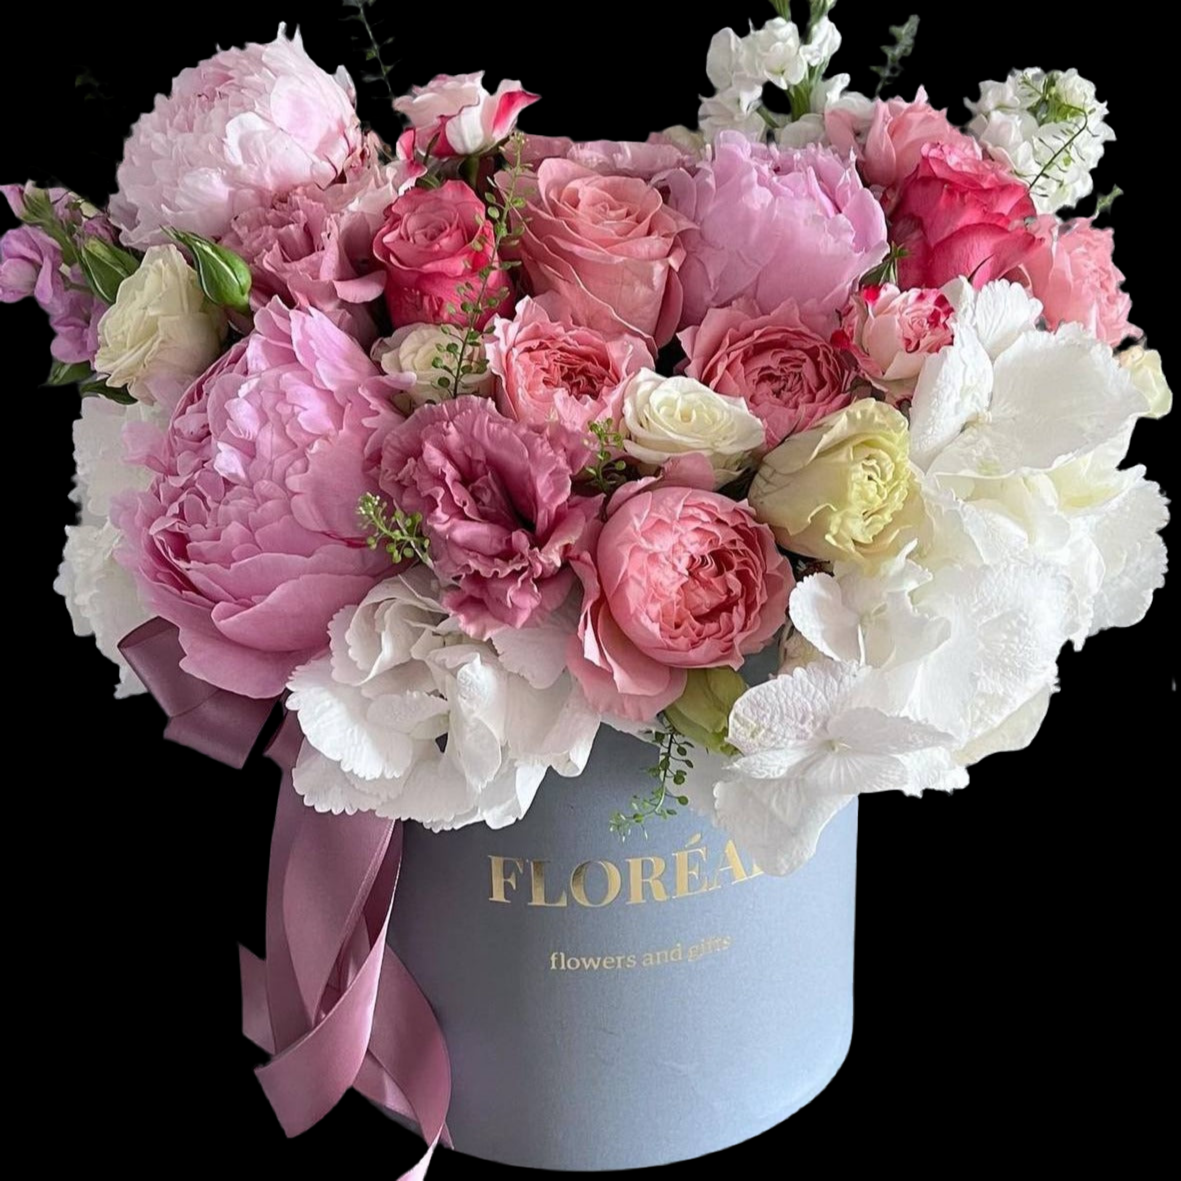 Box with Peonies - 59DF9FF3-624F-4A24-A477-D6D57455EFCF